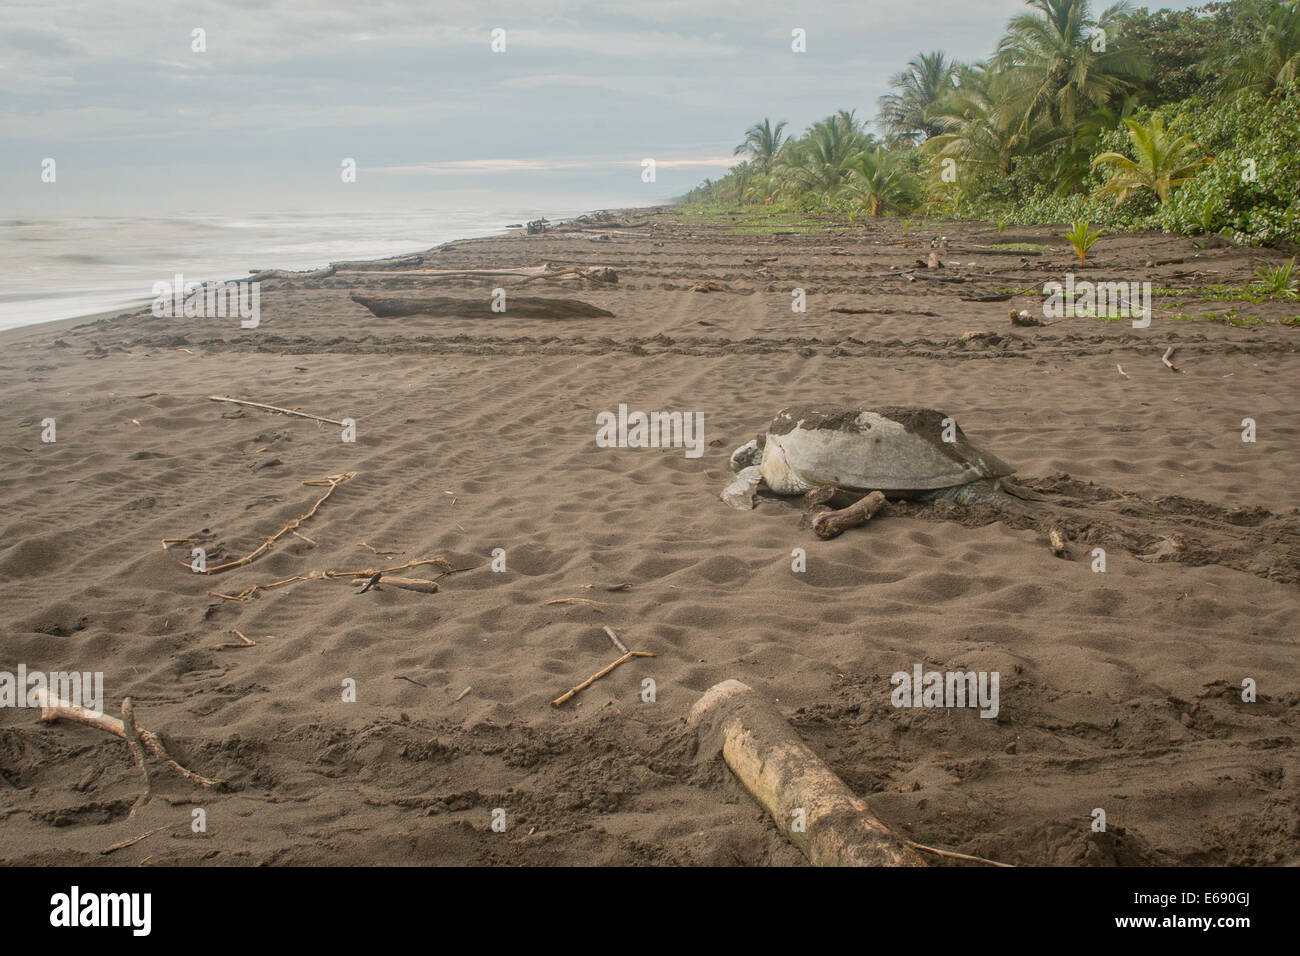 A green sea turtle (Chelonia mydas) female returning to the ocean after laying eggs in the sand.  Photographed in Costa Rica. Stock Photo